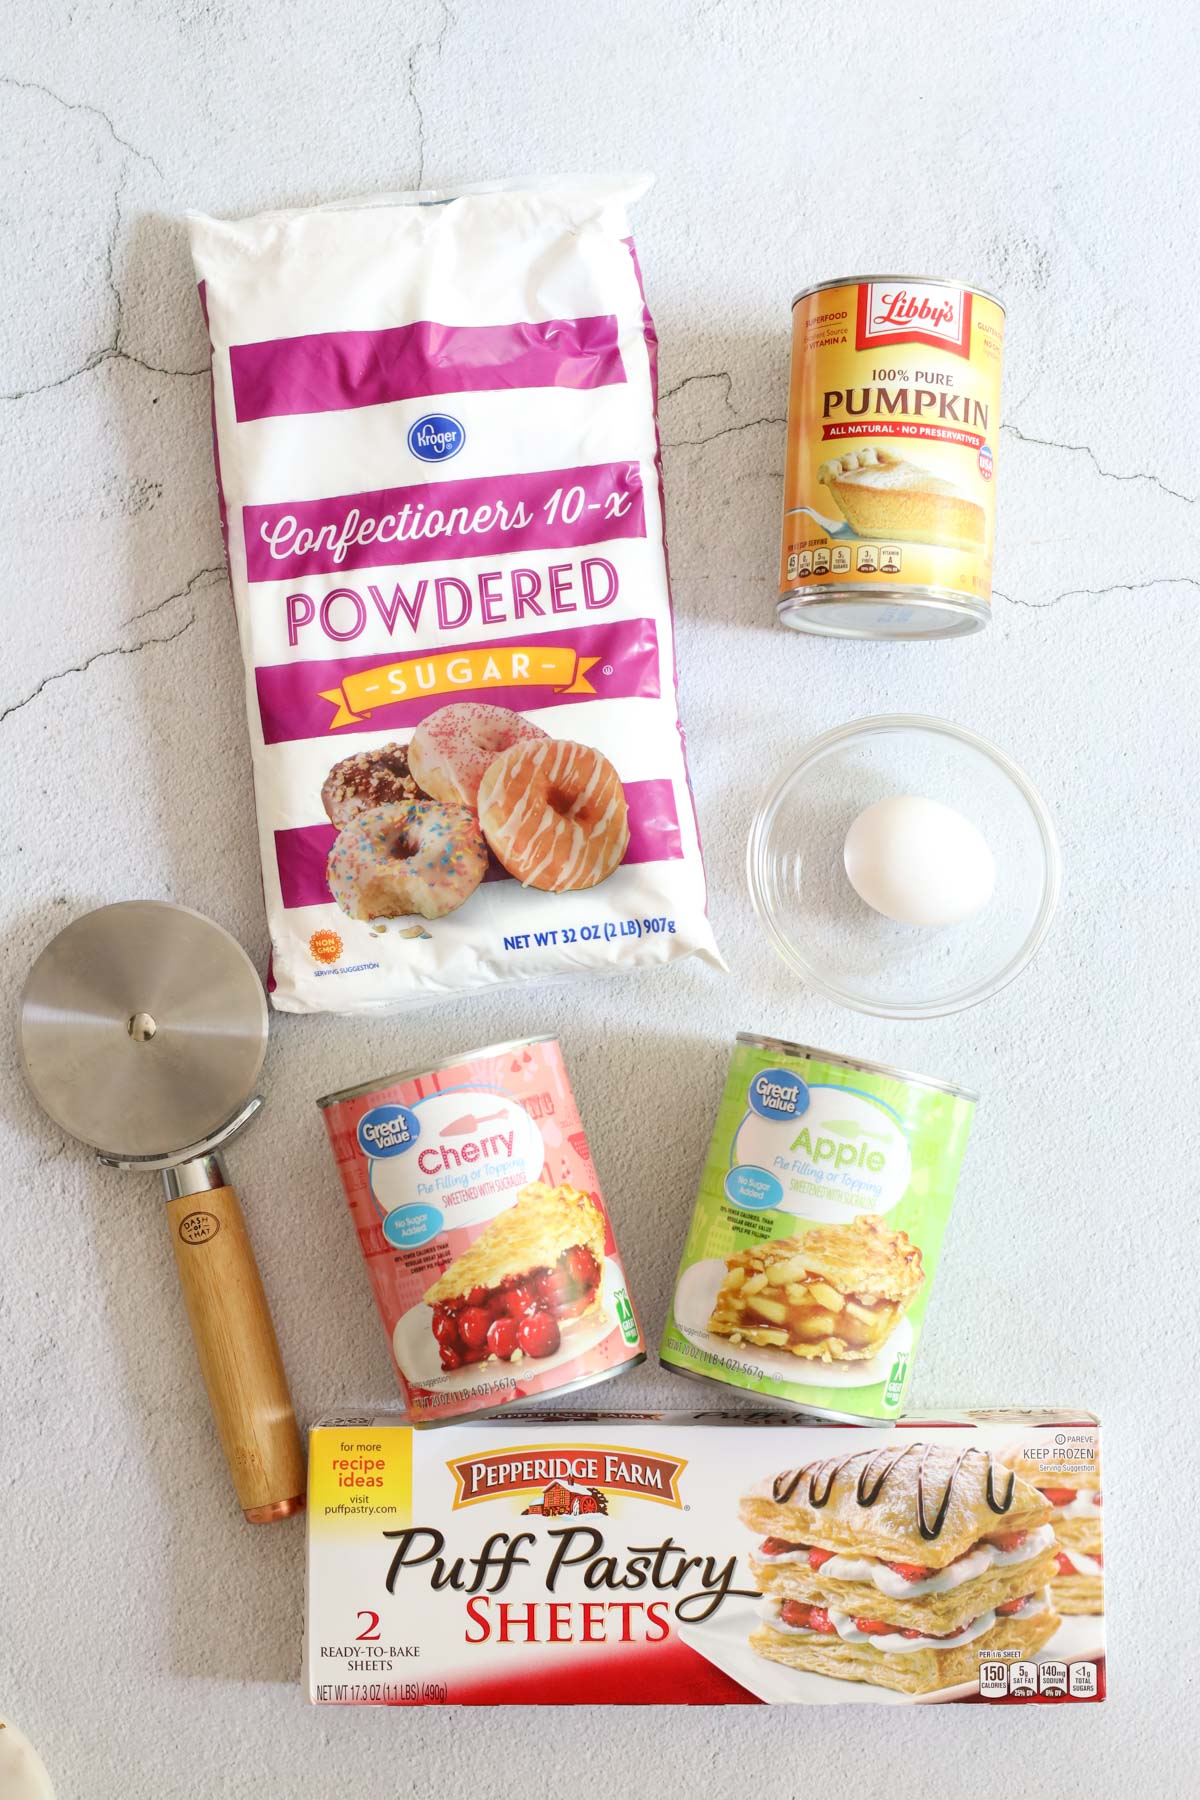 ingredients for simple air fryer turnovers including pie filling, confectioner's sugar, puff pastry